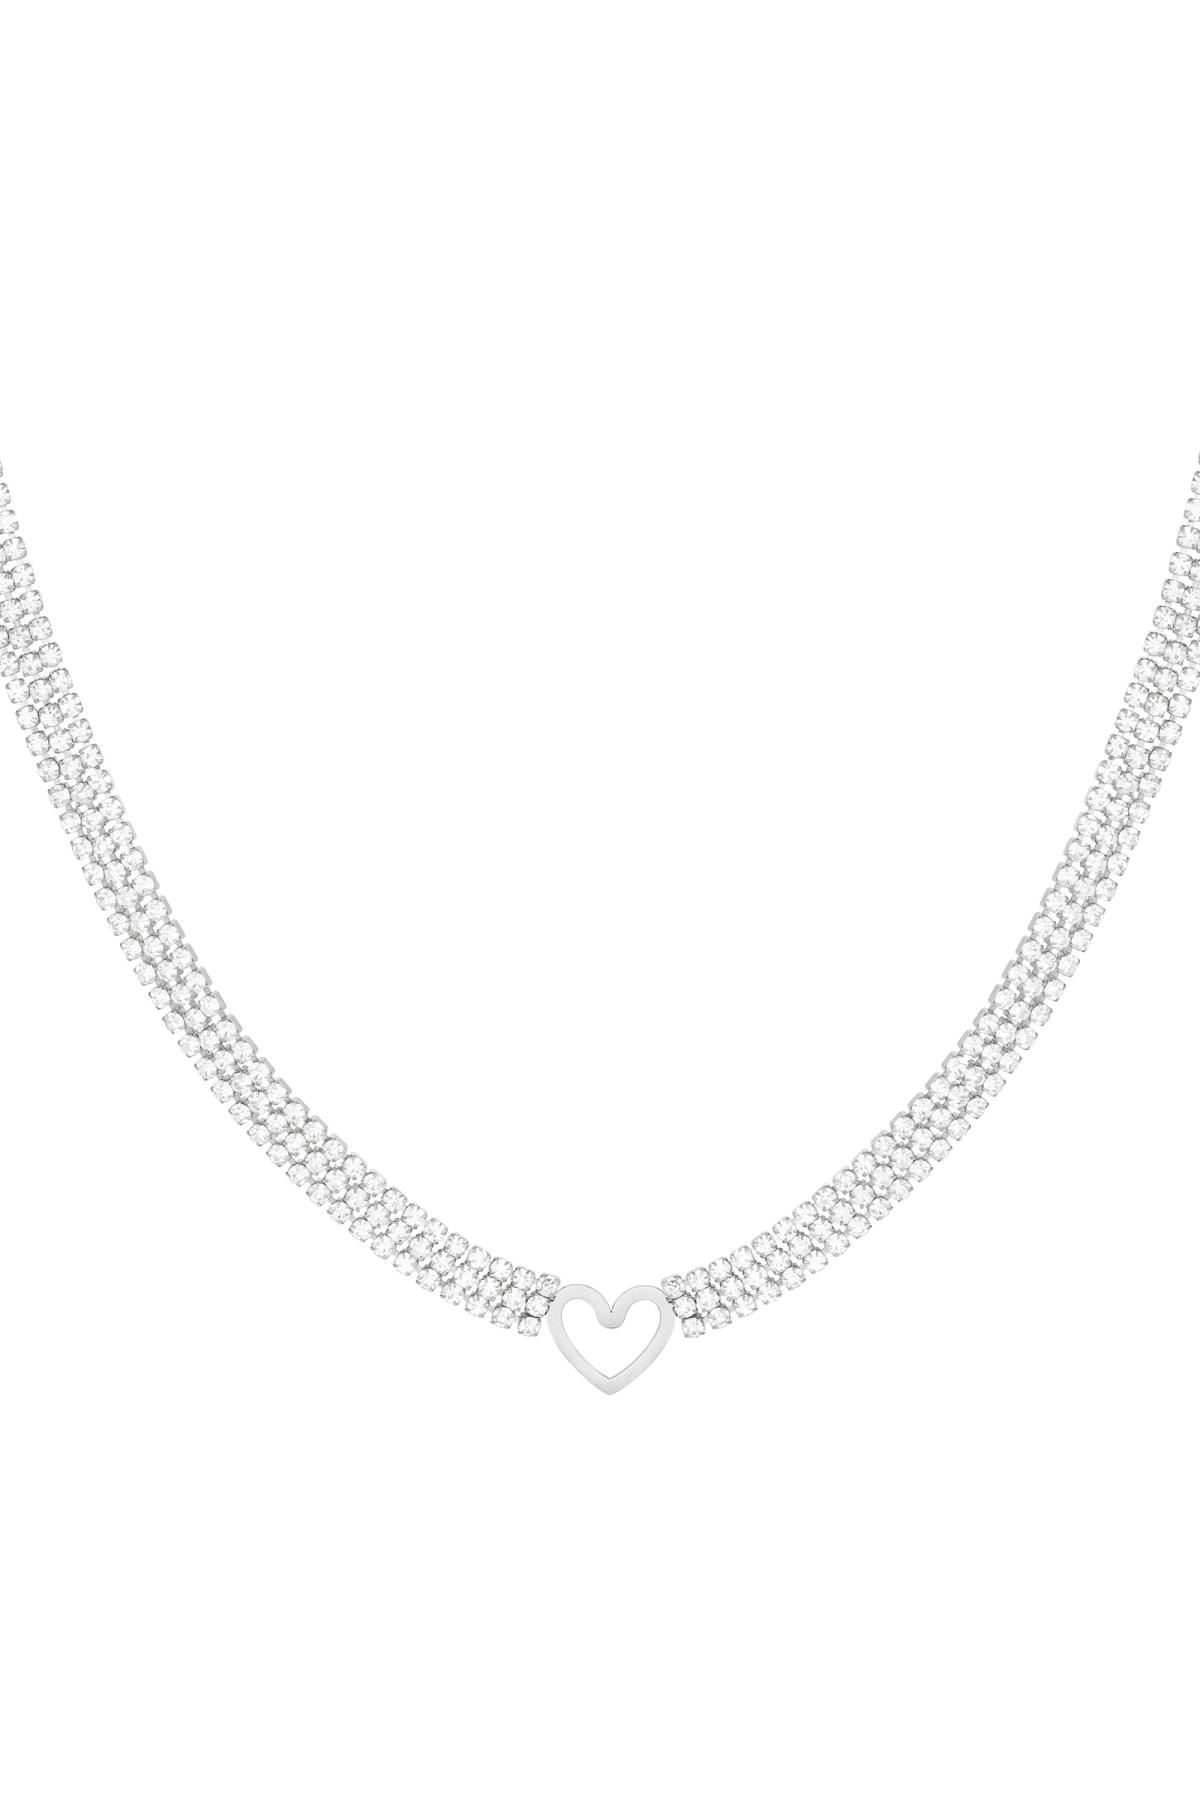 Necklace heart with zirconia Silver Stainless Steel